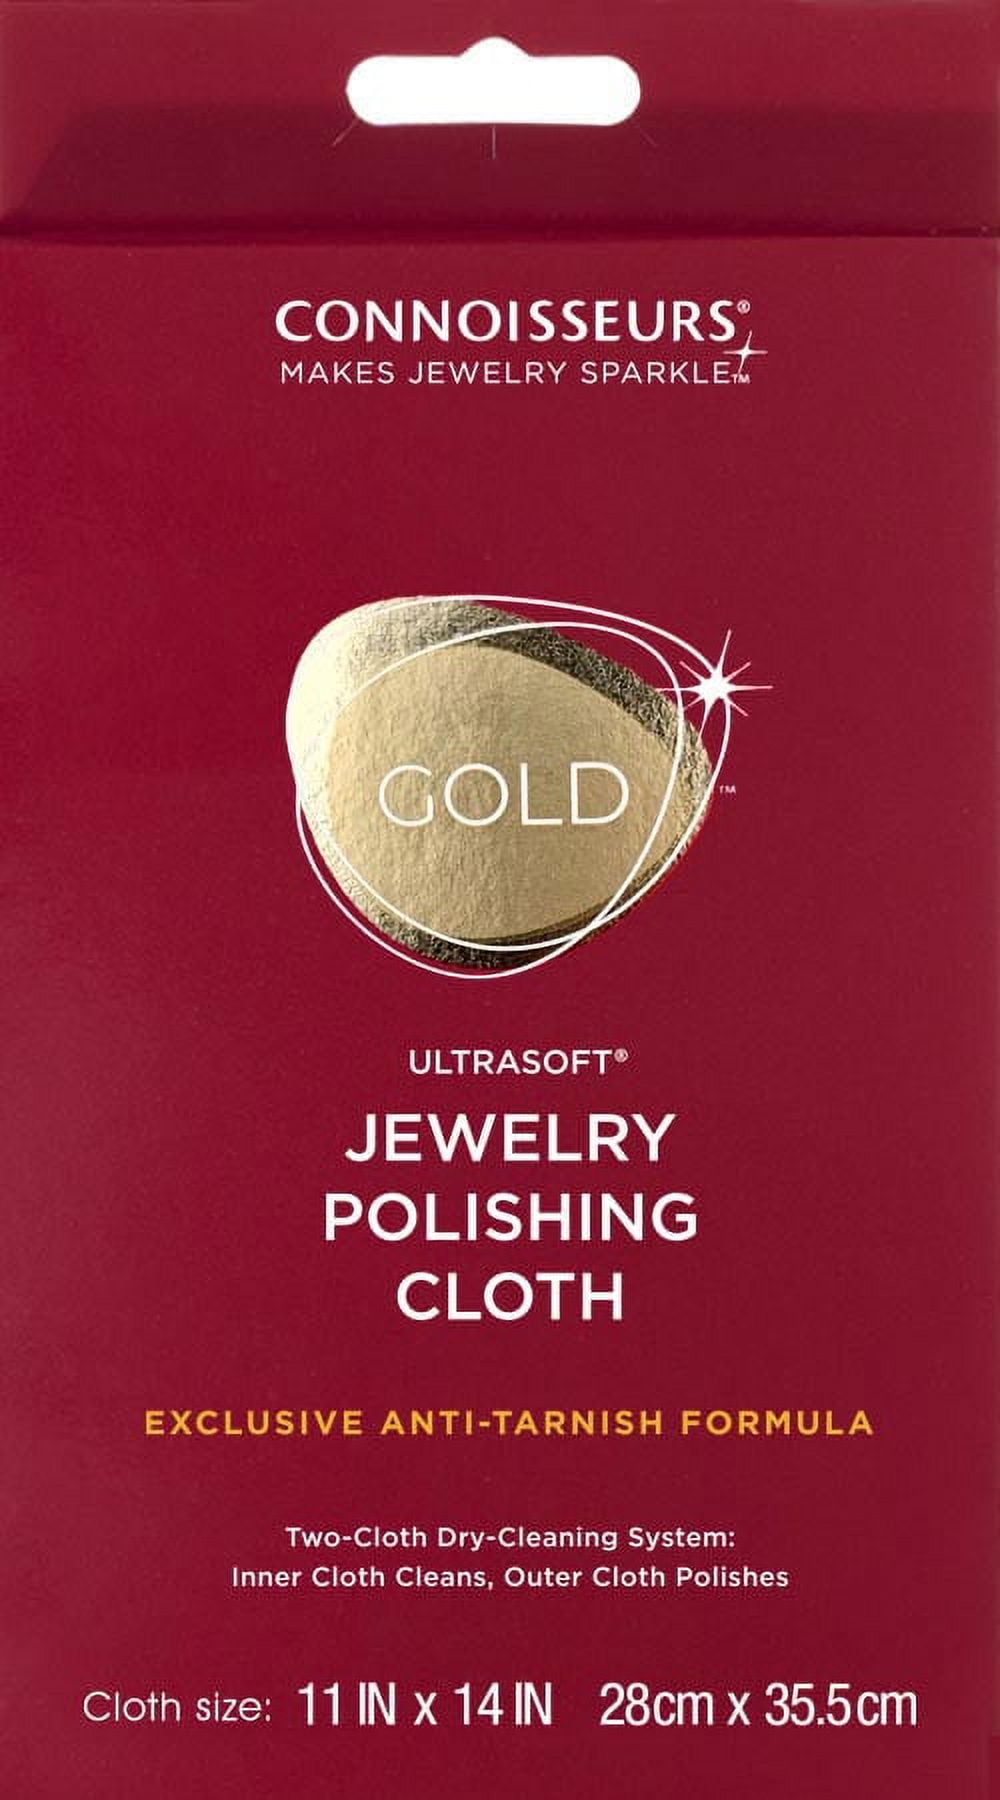 Connoisseurs Gold Jewelry Polishing Cloth